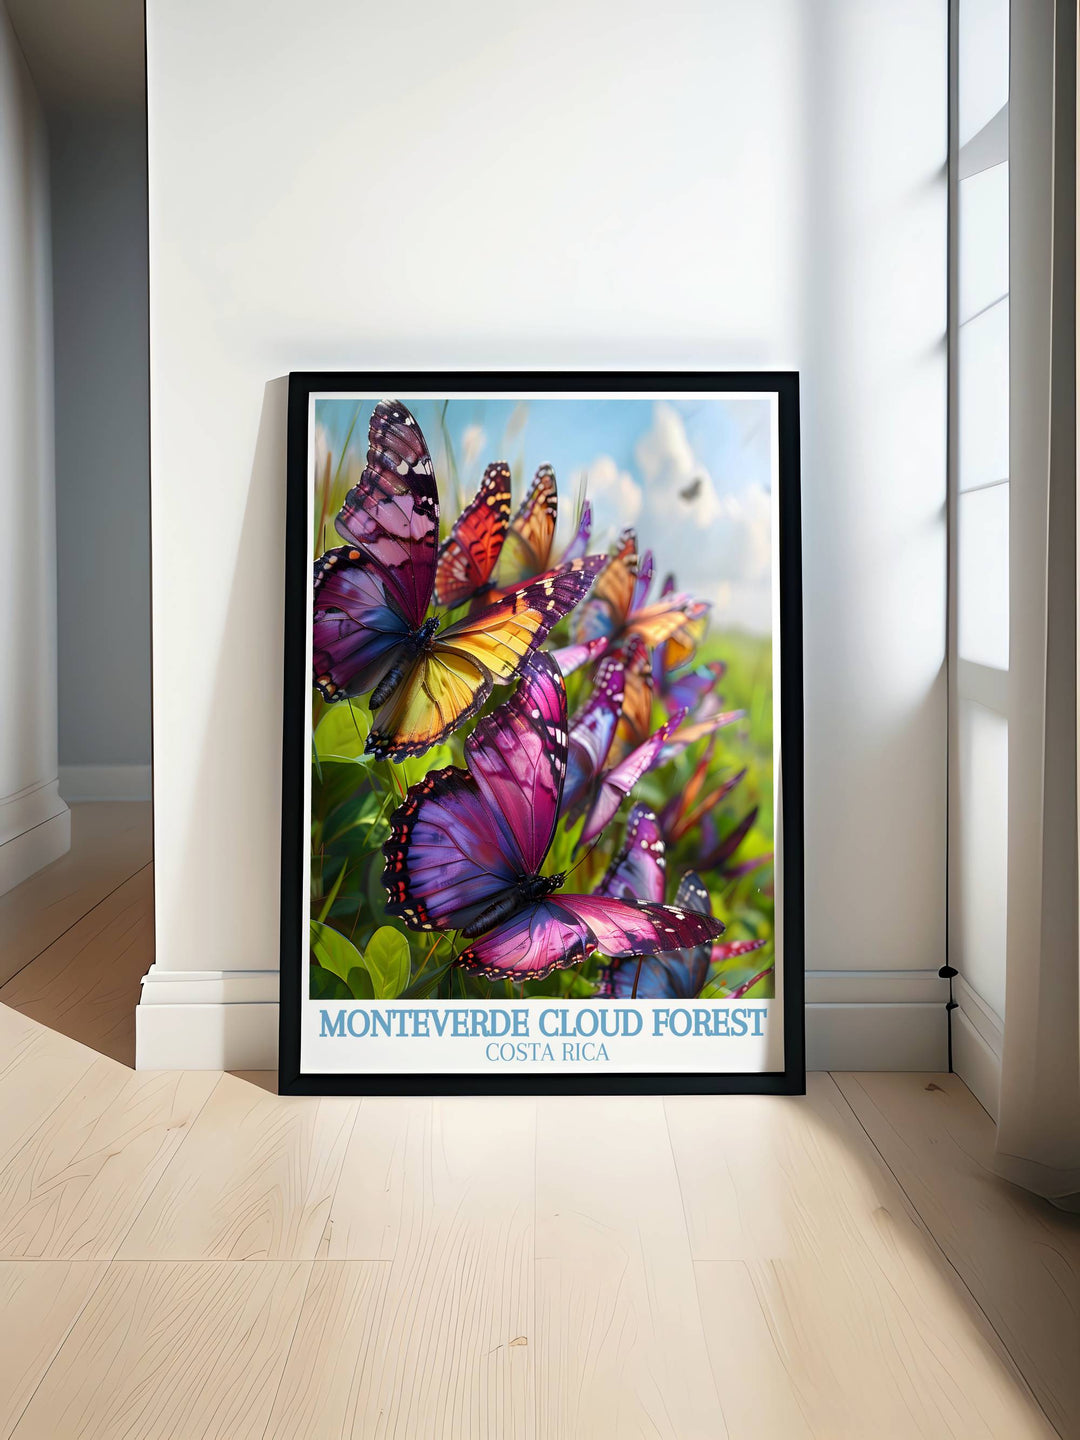 Gallery wall art featuring the lush Monteverde Cloud Forest, illustrating its diverse flora and fauna in vibrant colors.